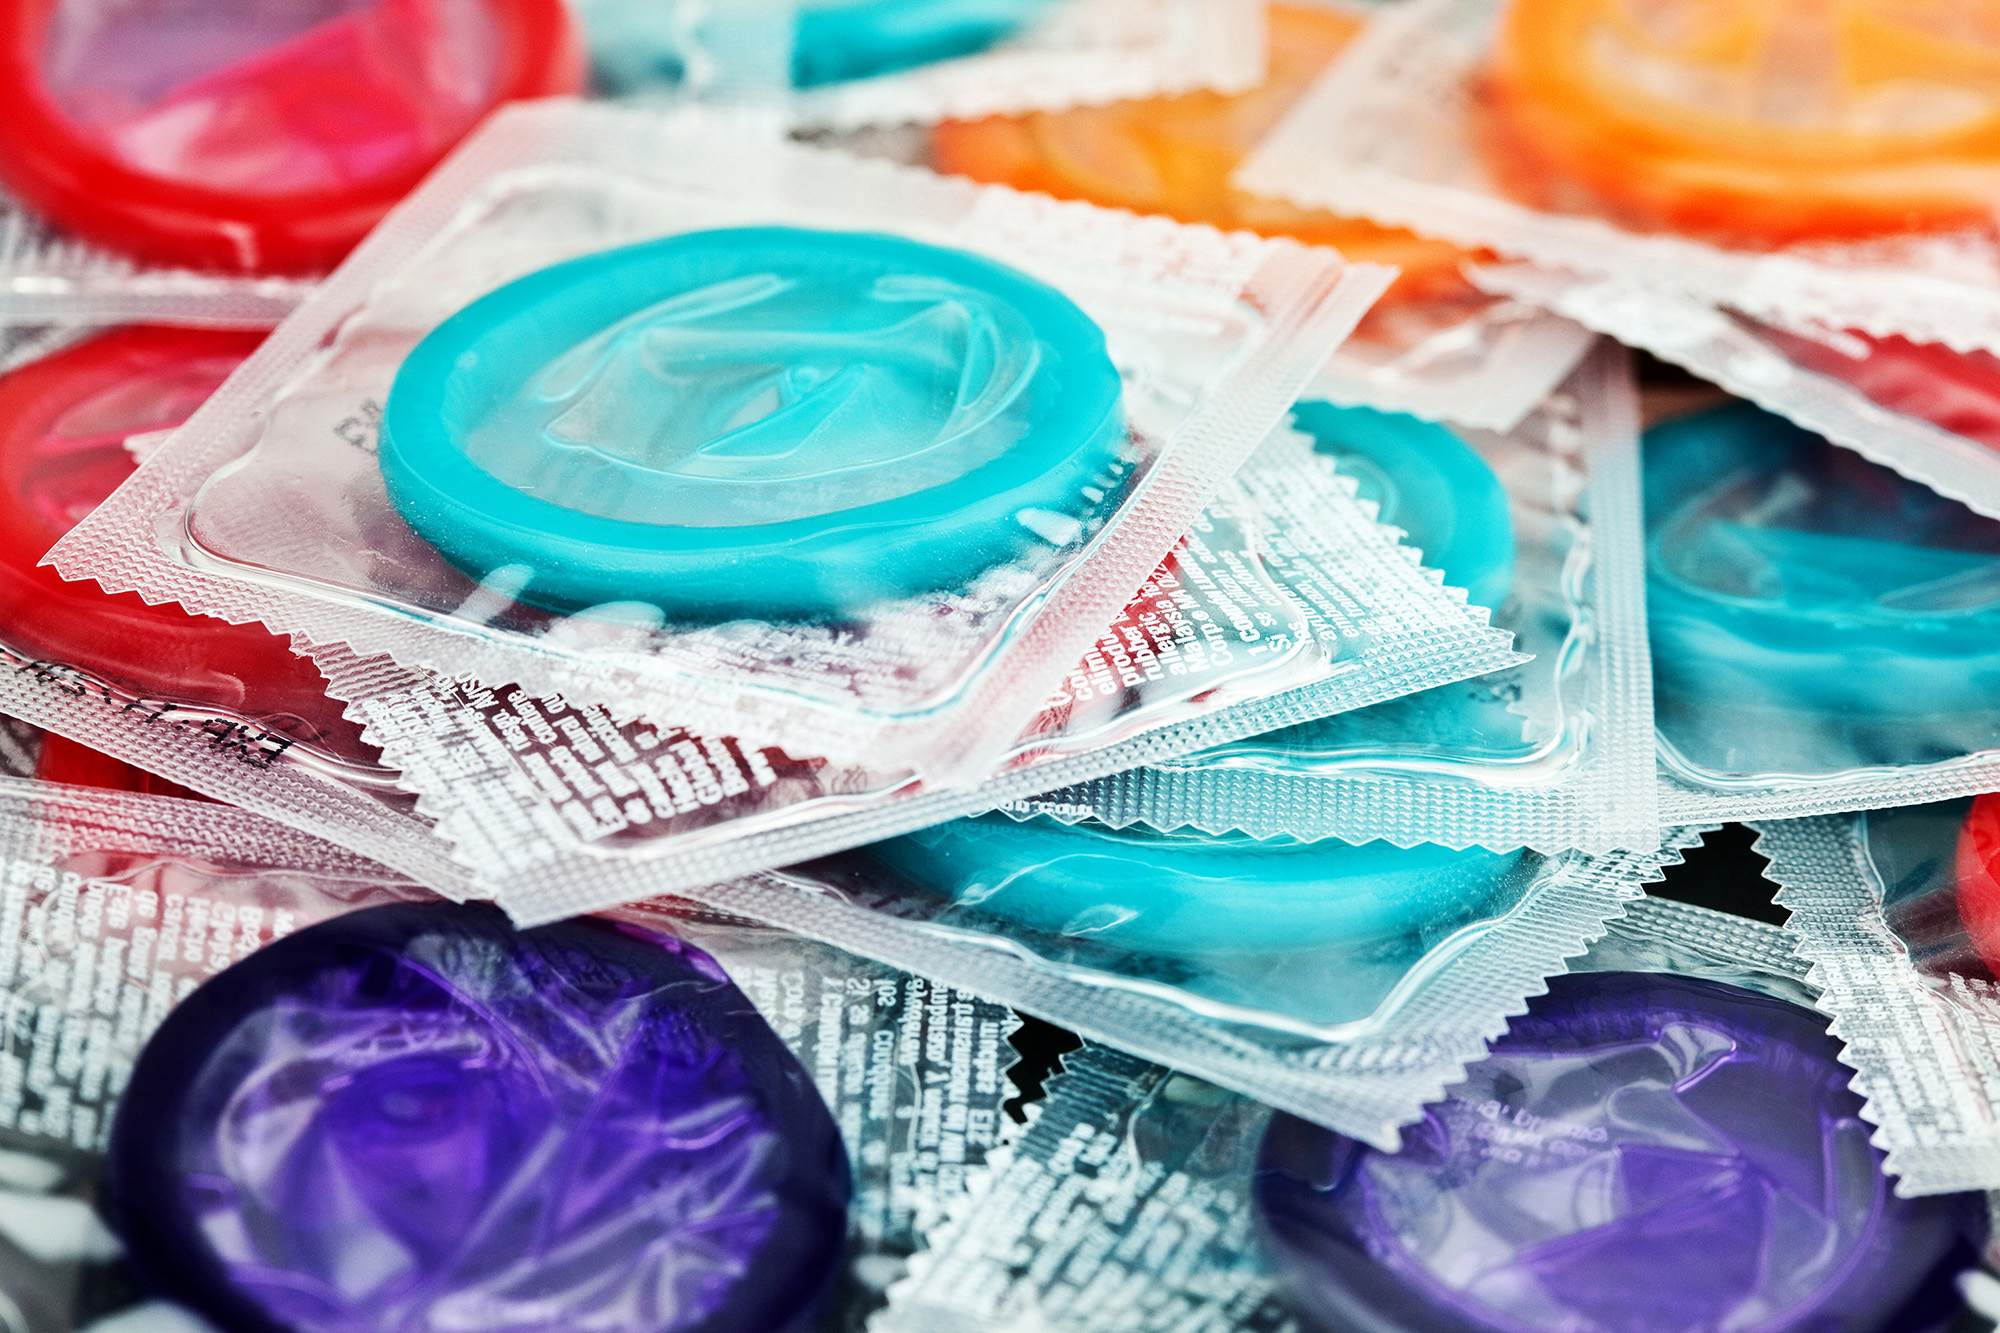 How to Stop Condoms from Ruining the Moment